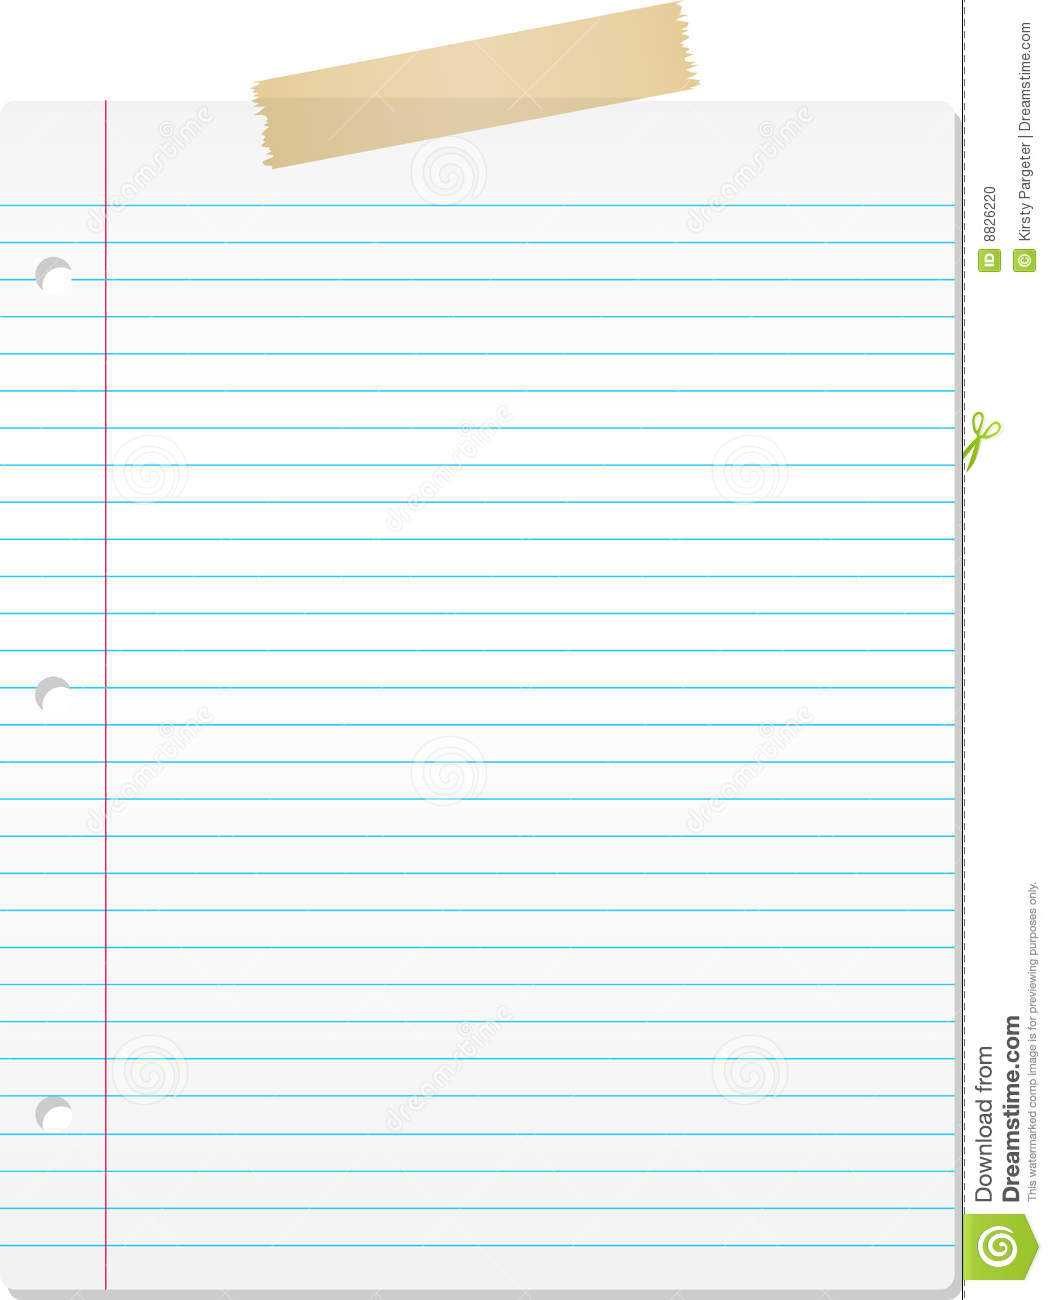 026 Microsoft Word Lined Paper Template Ideas Fantastic Doc Pertaining To Ruled Paper Word Template